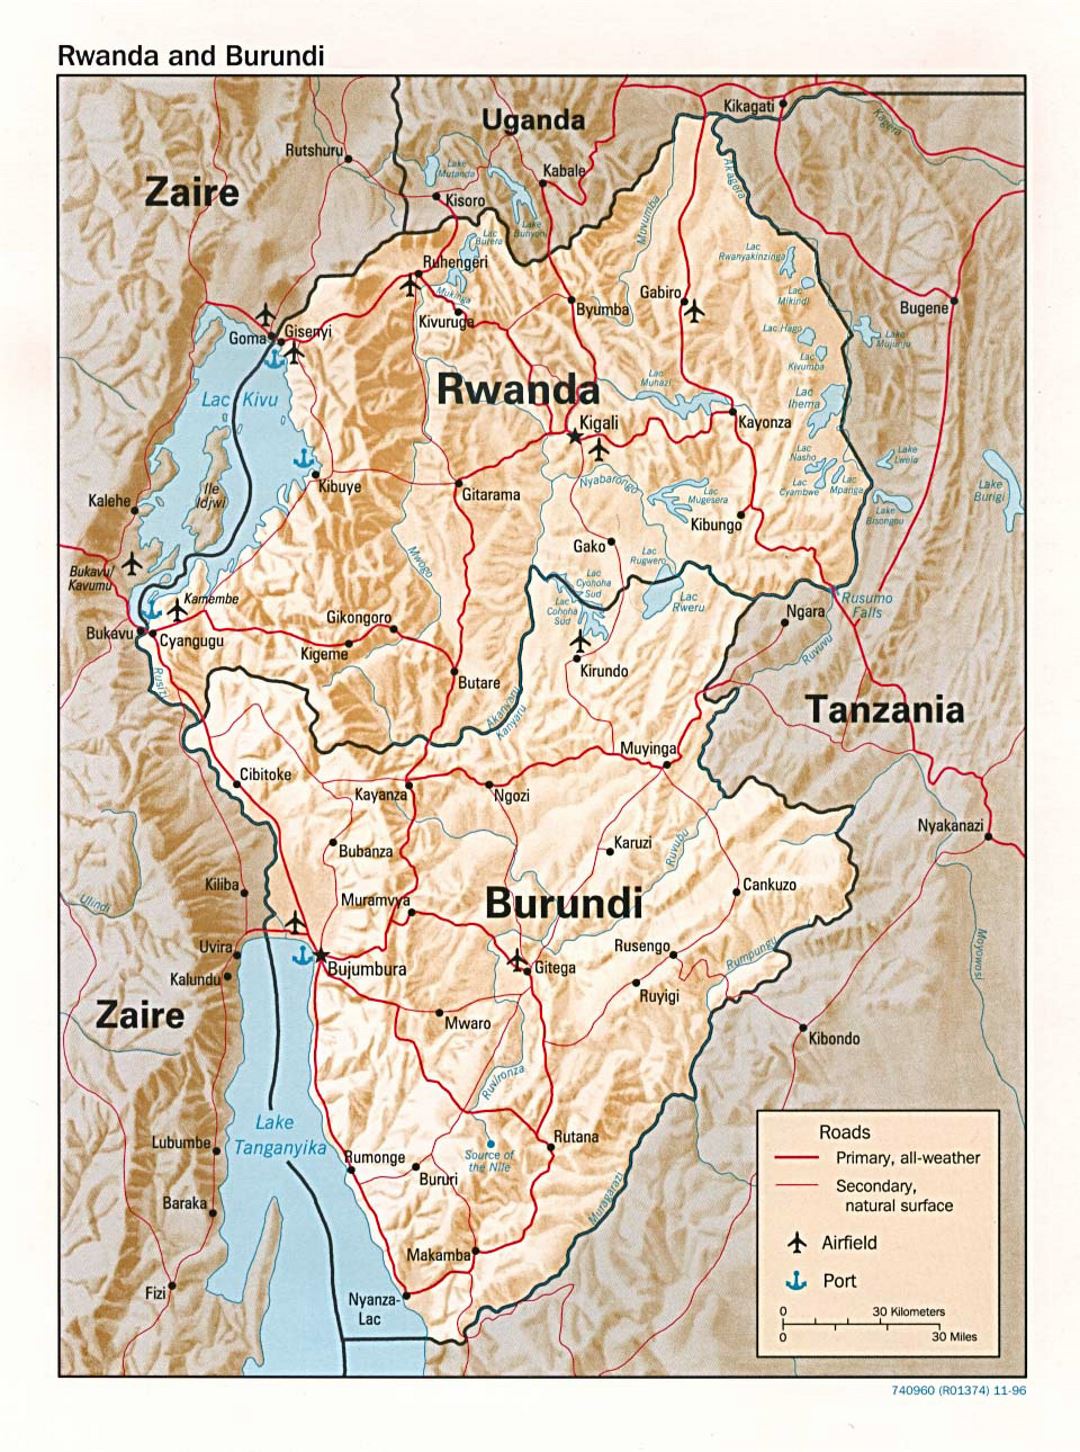 Detailed political map of Rwanda and Burundi with relief, roads, major cities, ports and airports - 1996